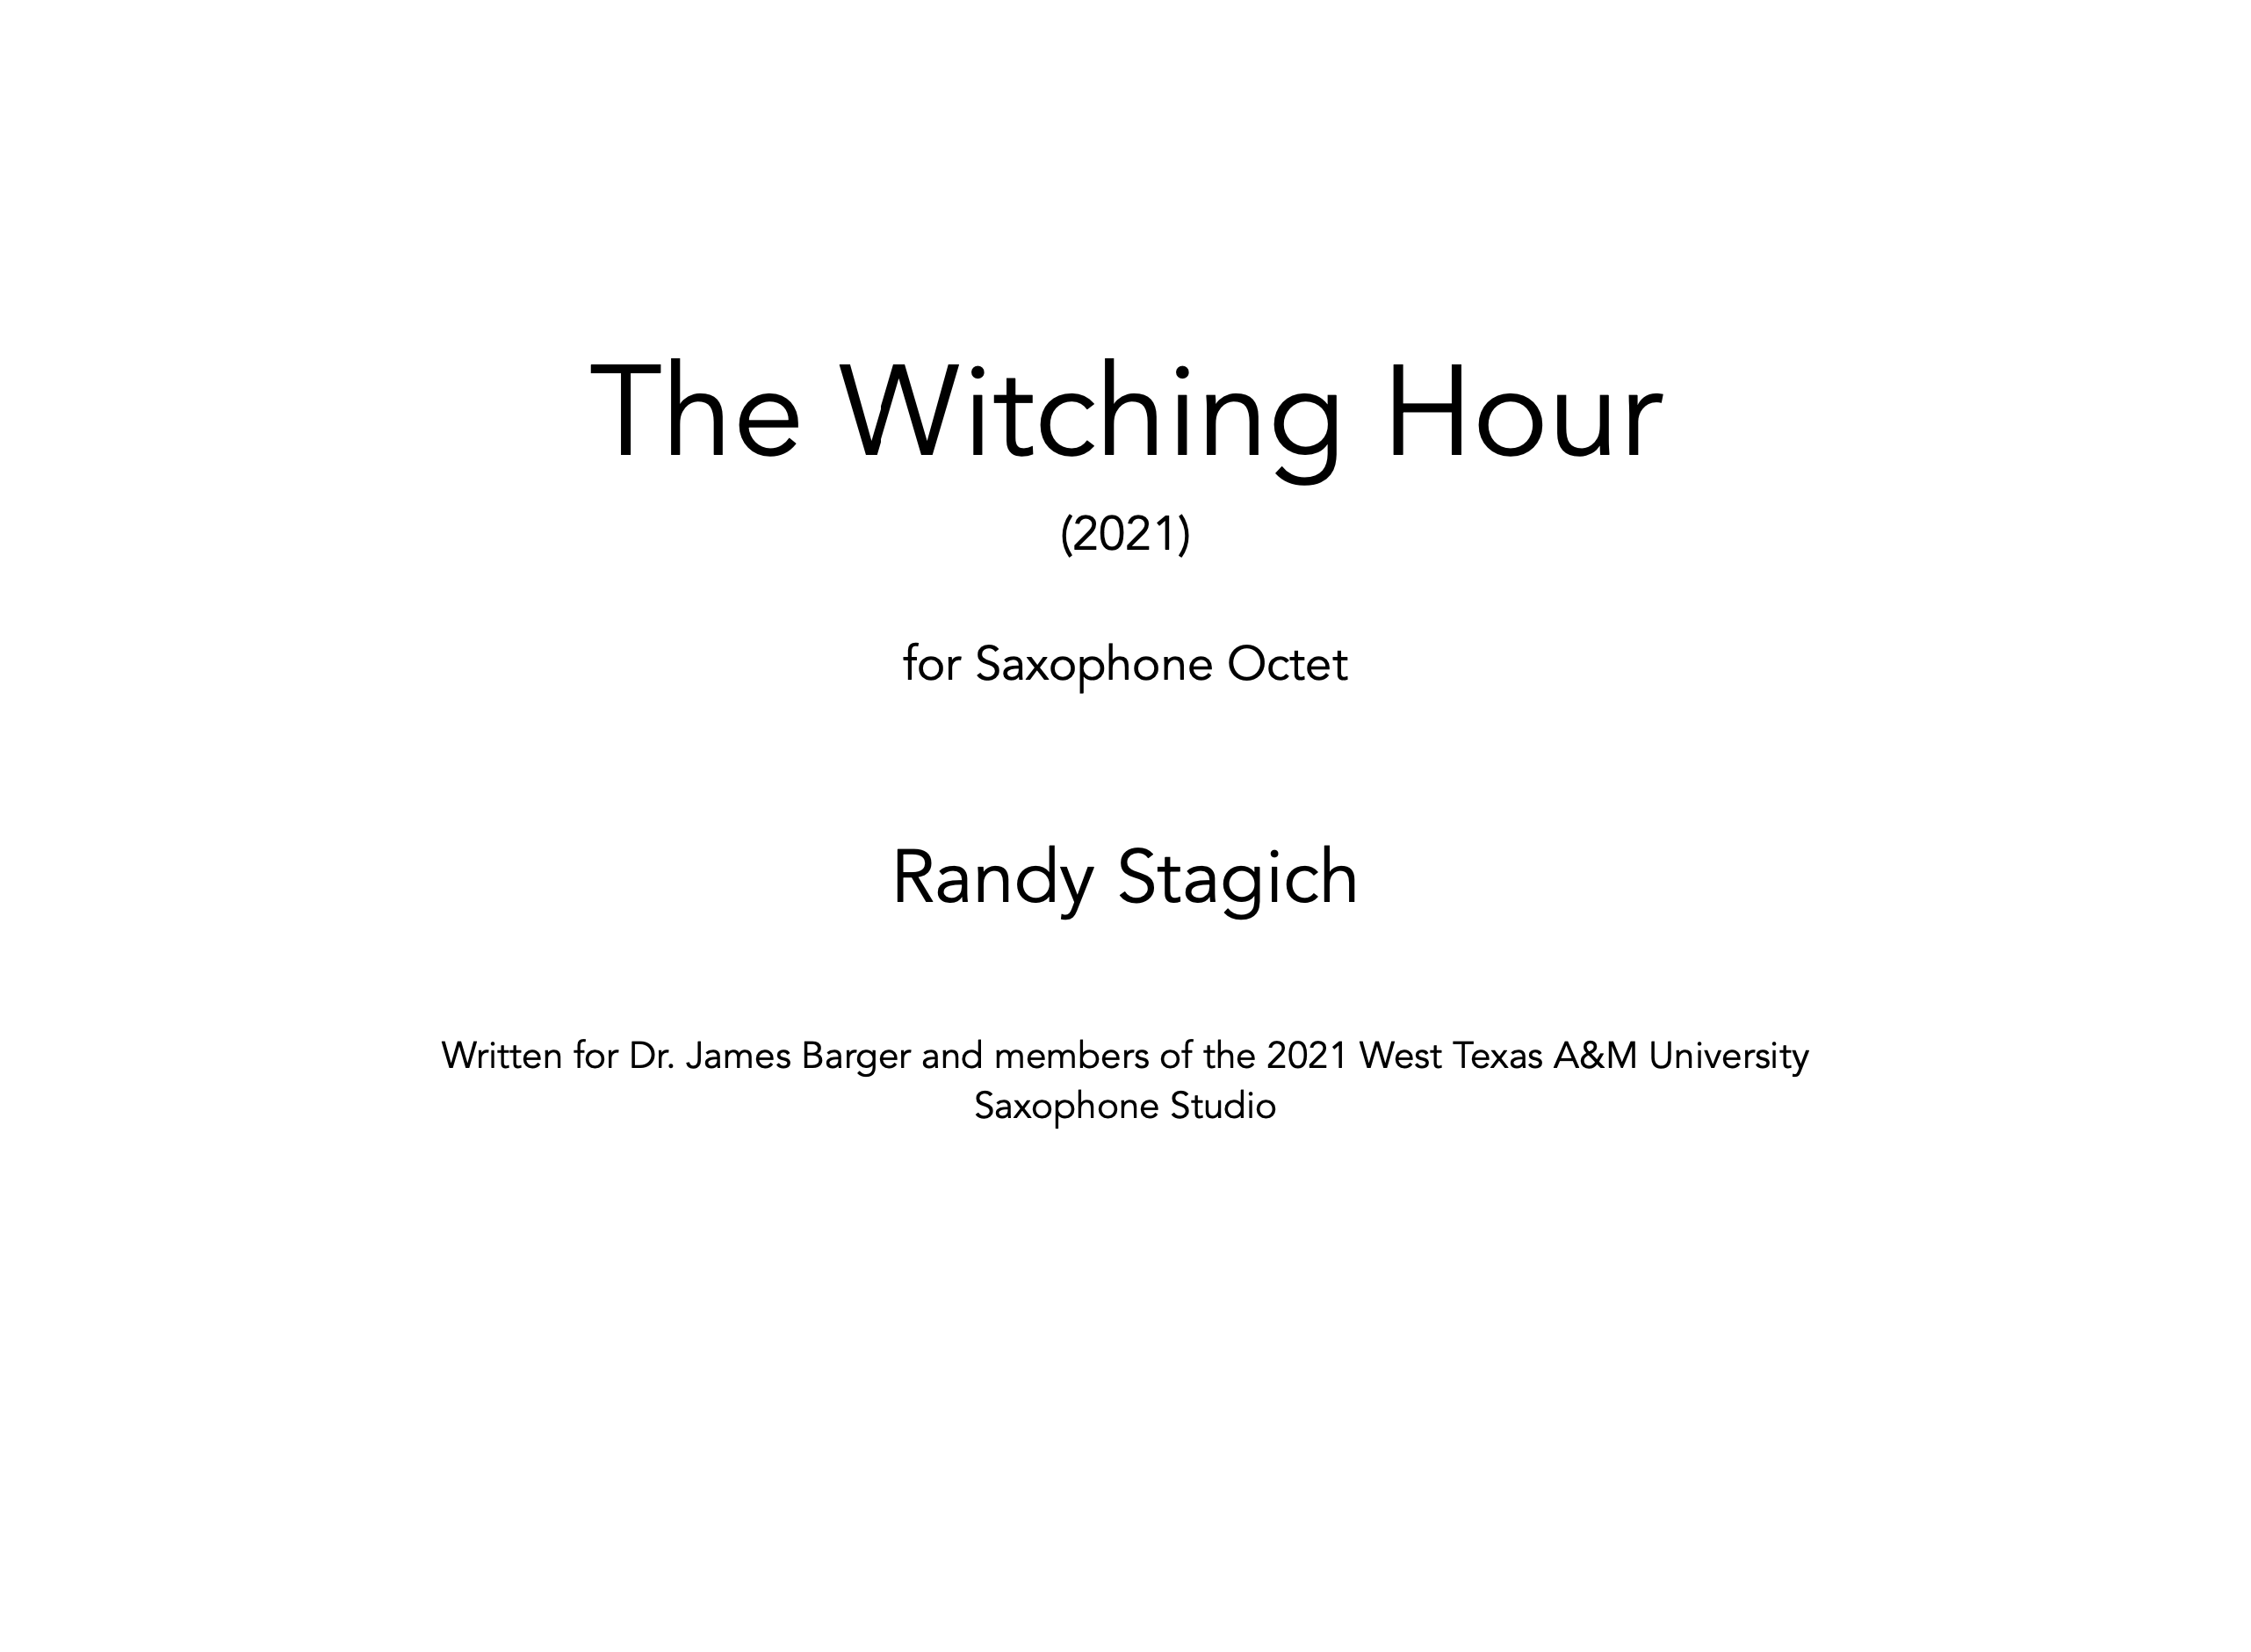 The Witching Hour by Randy Stagich